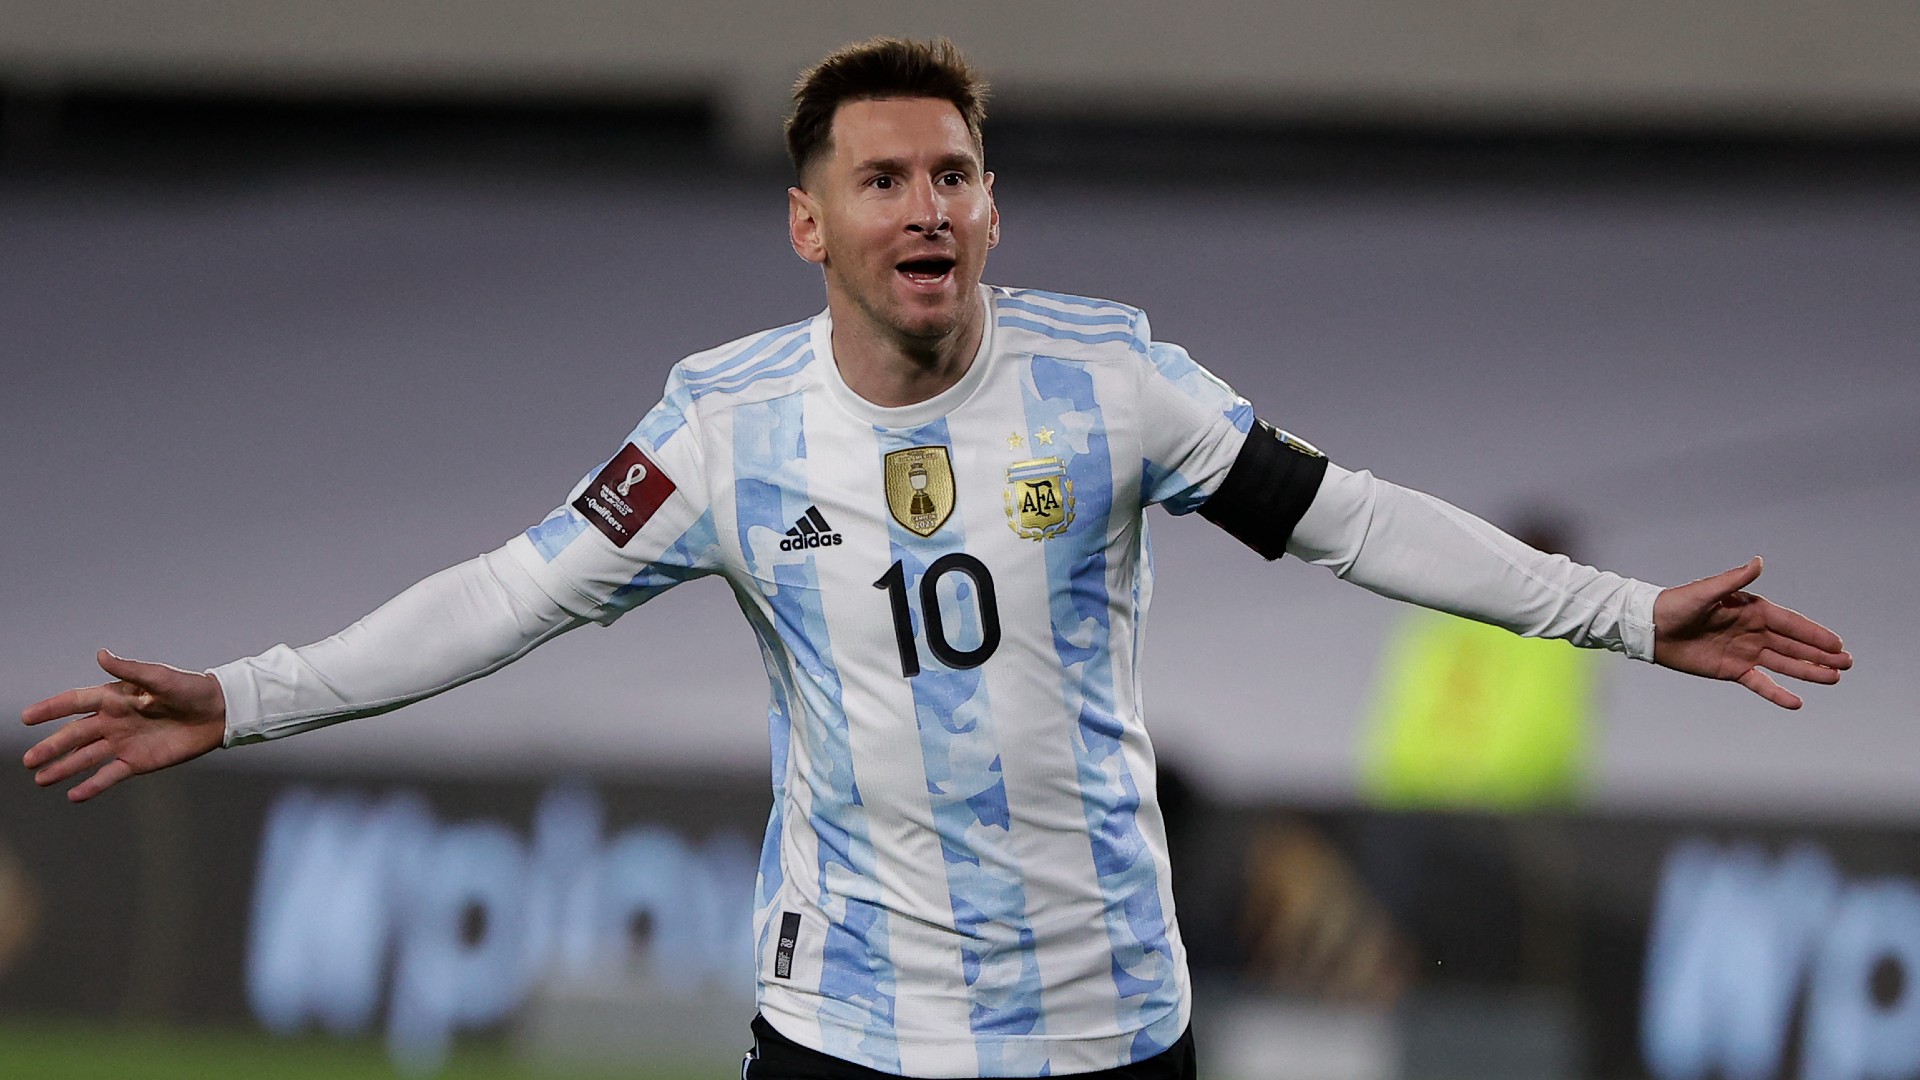 Paraguay vs Argentina: TV channel, live stream, team news and preview